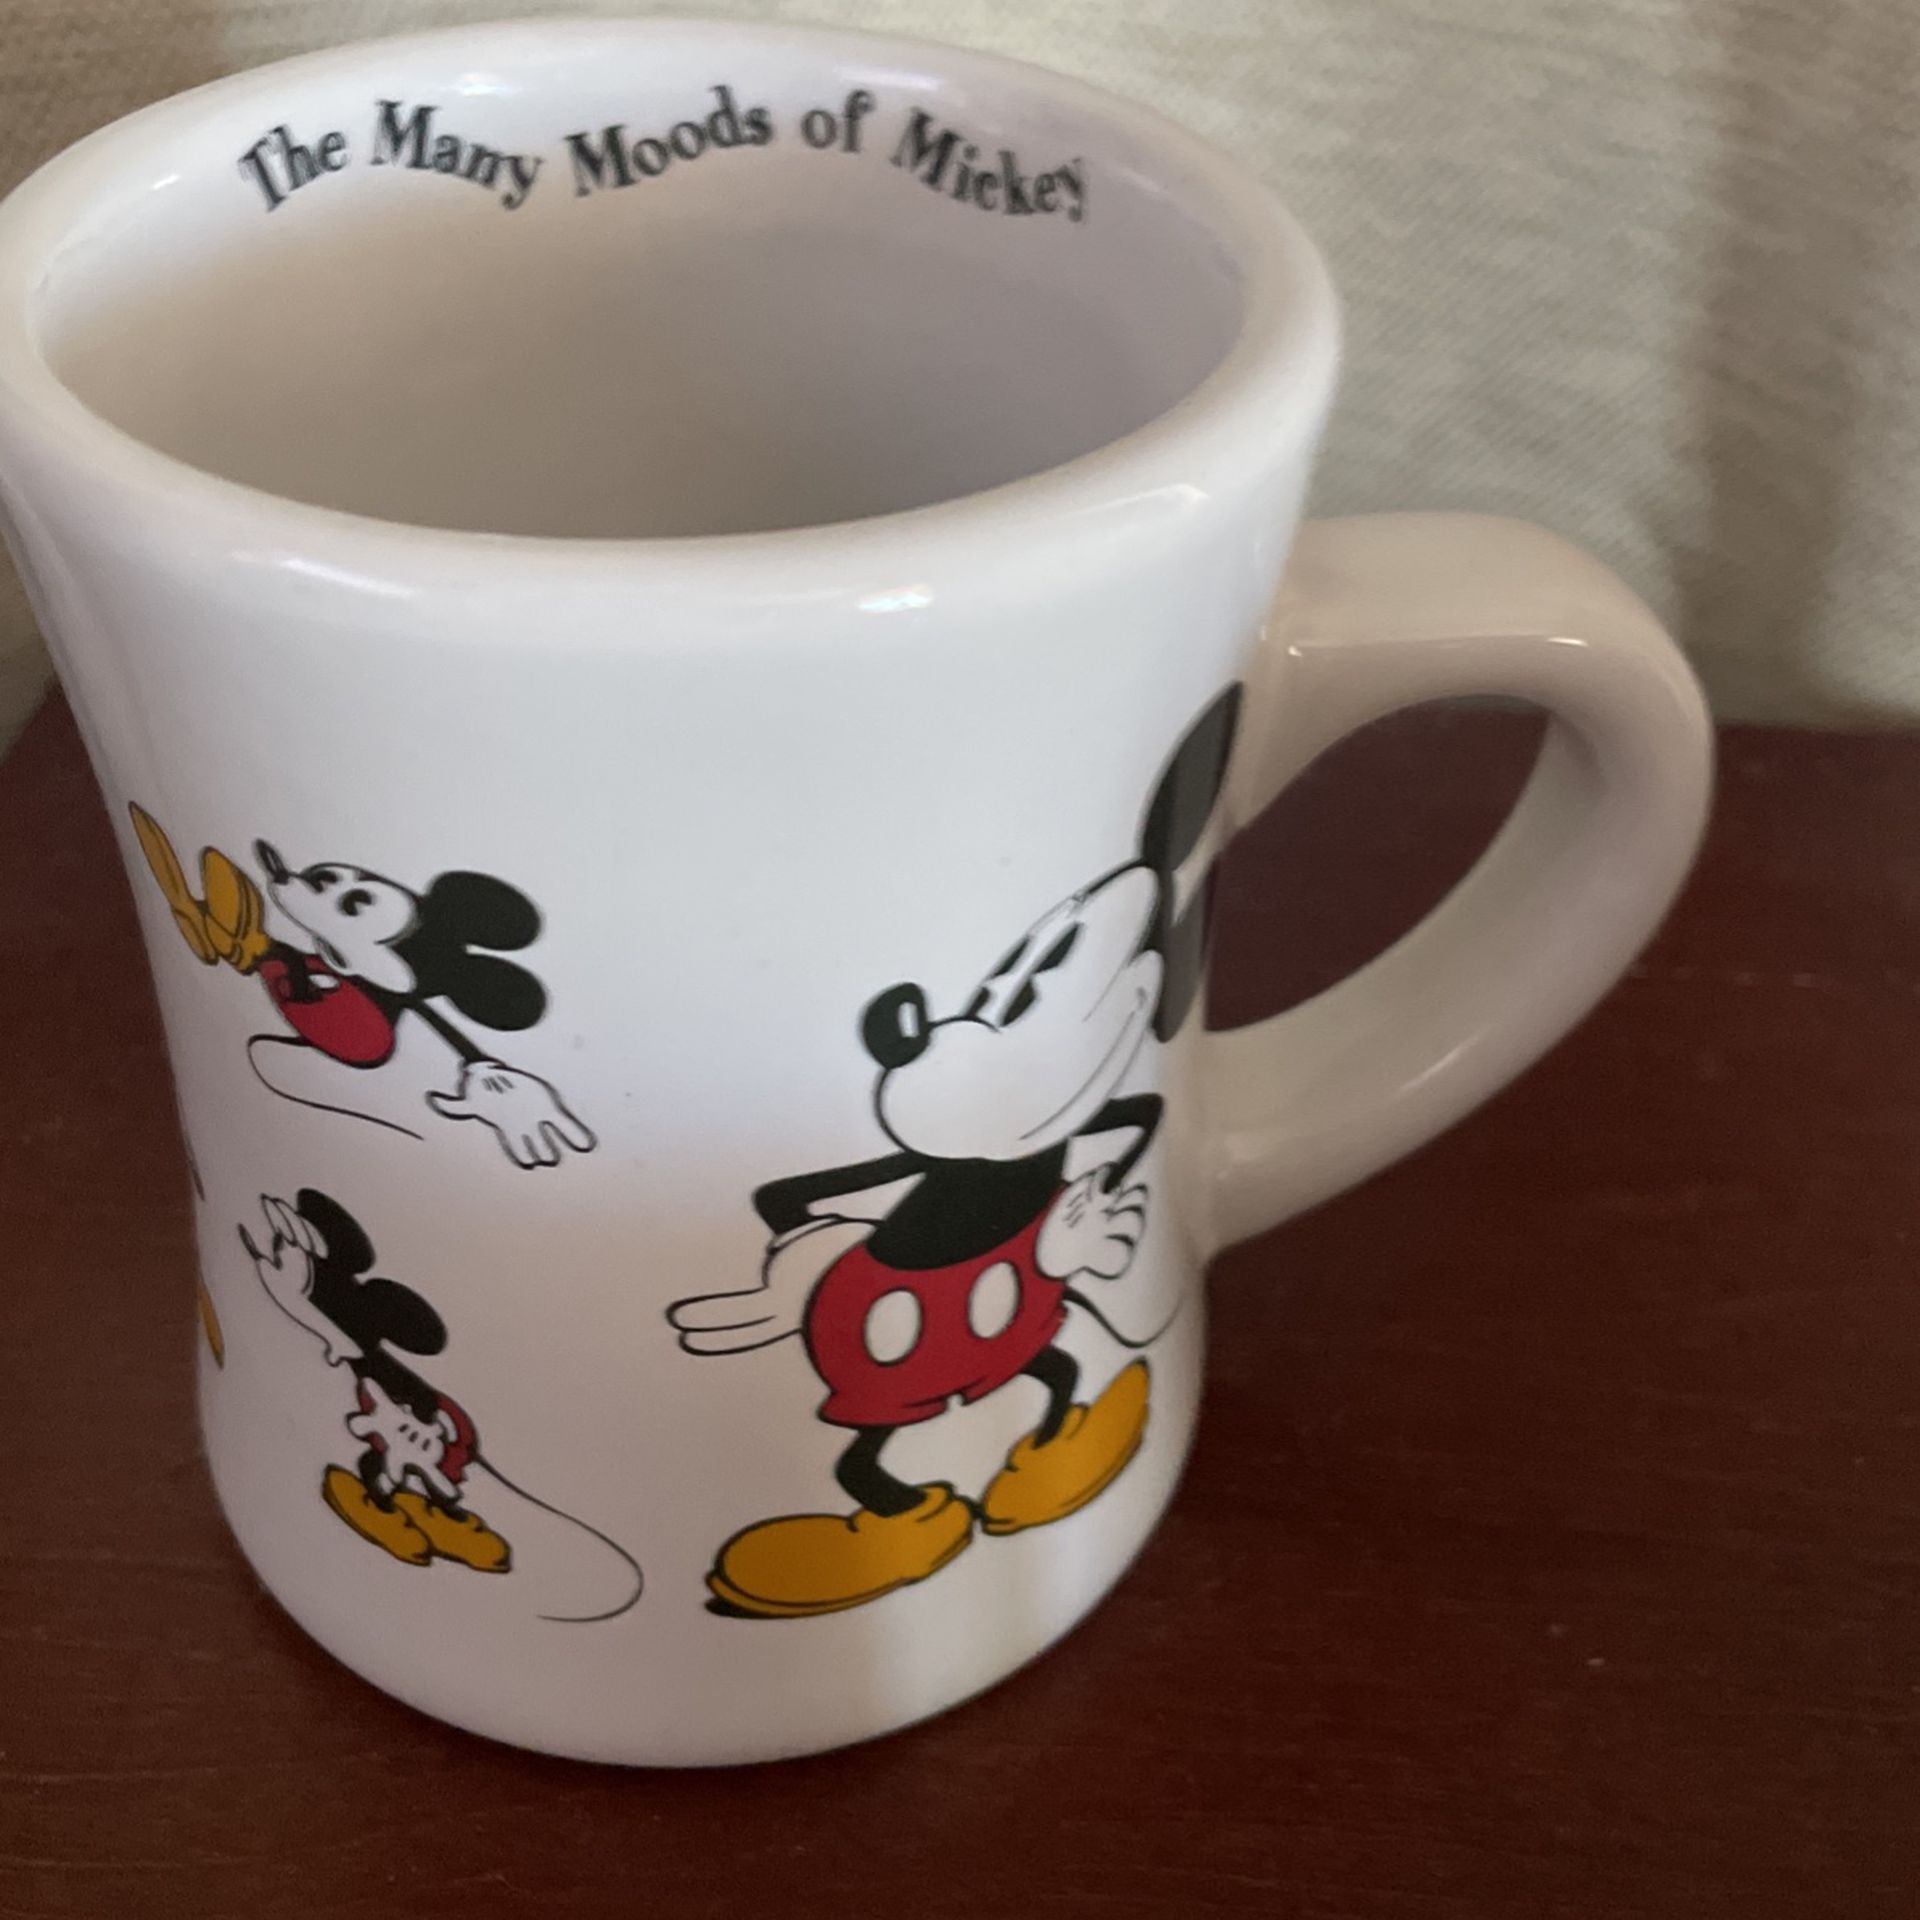 Disney Minnie Mouse Mug Warmer for Sale in Champions Gt, FL - OfferUp